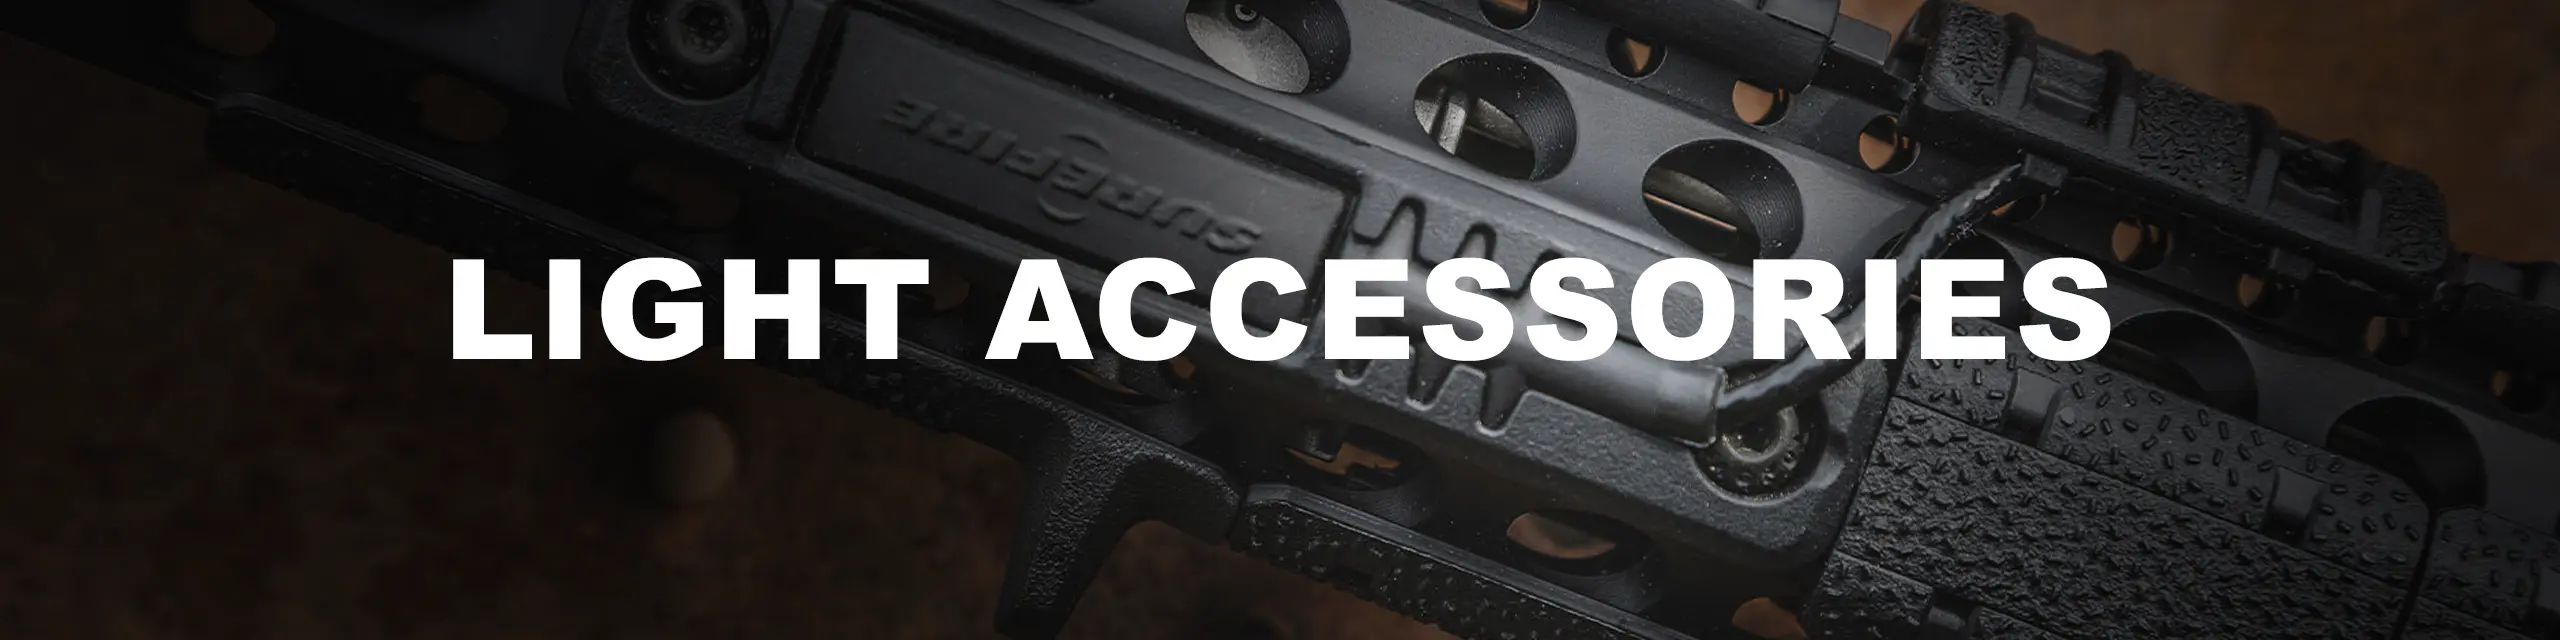 Light Accessories and Switches offered by East Texas Gunner